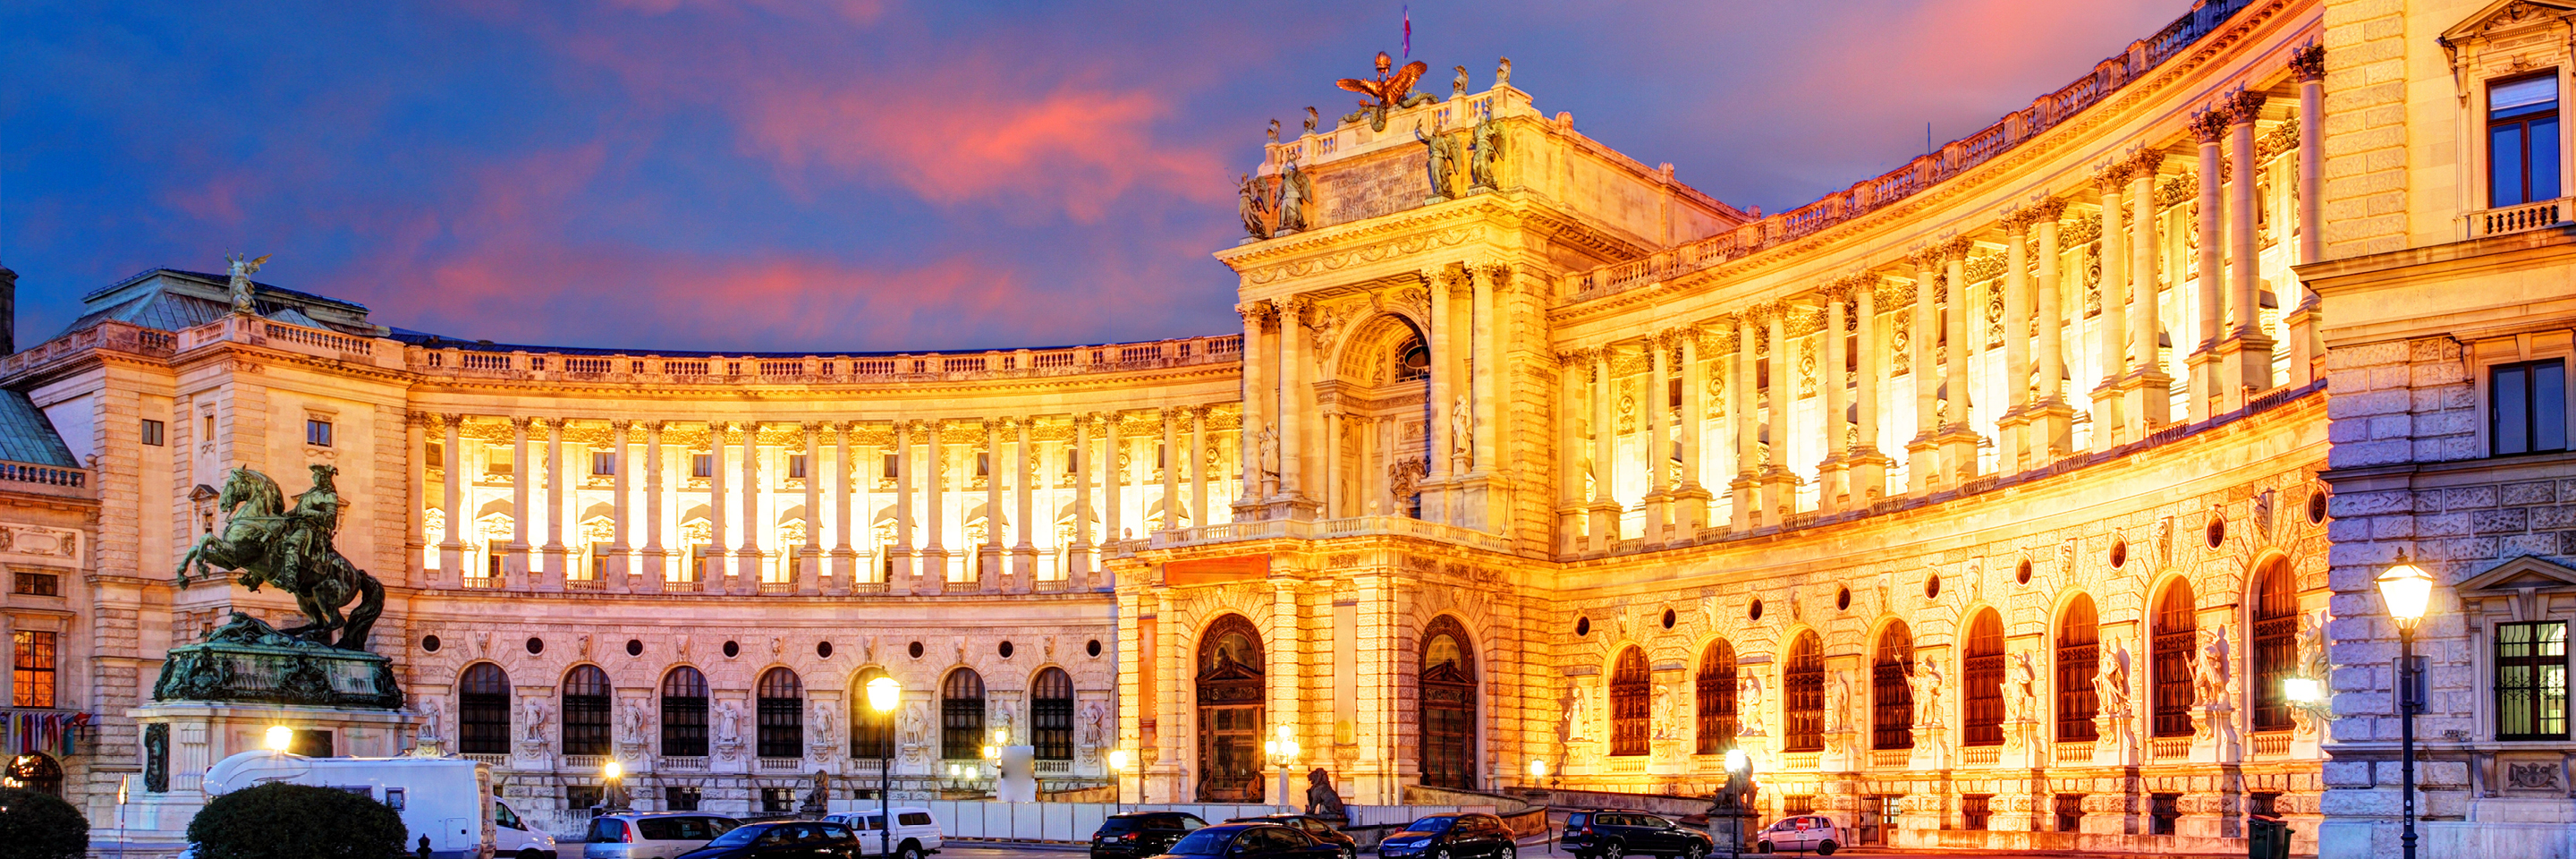 A Taste of the Danube with 2 Nights in Vienna (Eastbound)